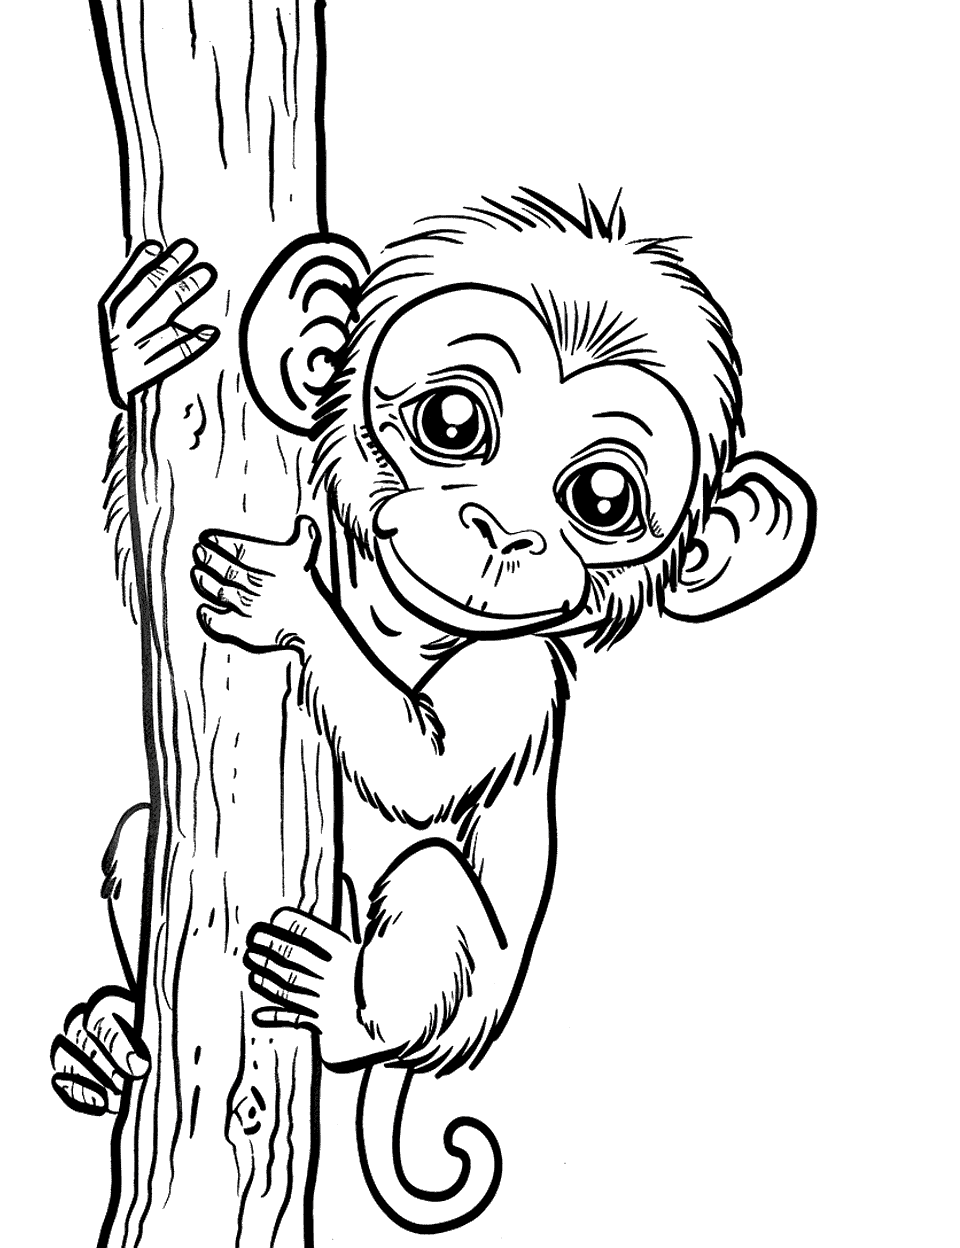 Baby Monkey Clinging Coloring Page - A baby monkey clinging tightly to a simple tree branch.